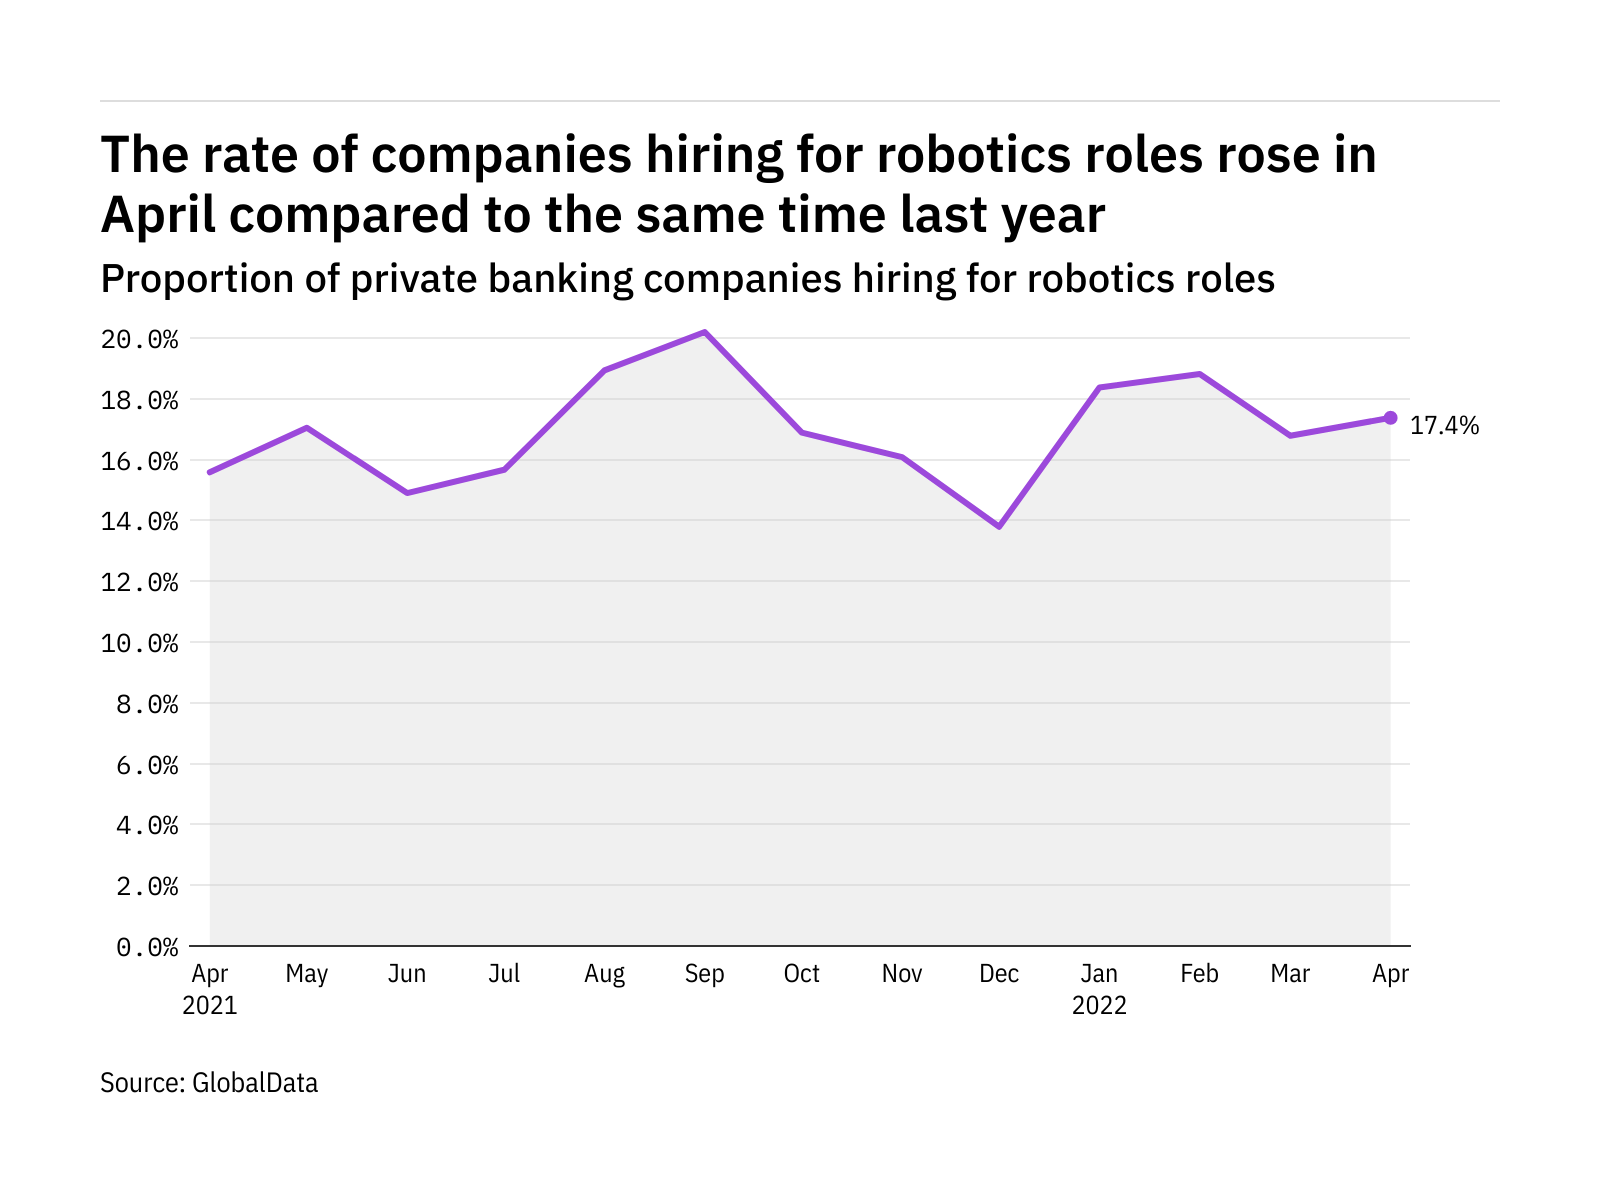 Robotics hiring levels in the private banking industry rose in April 2022